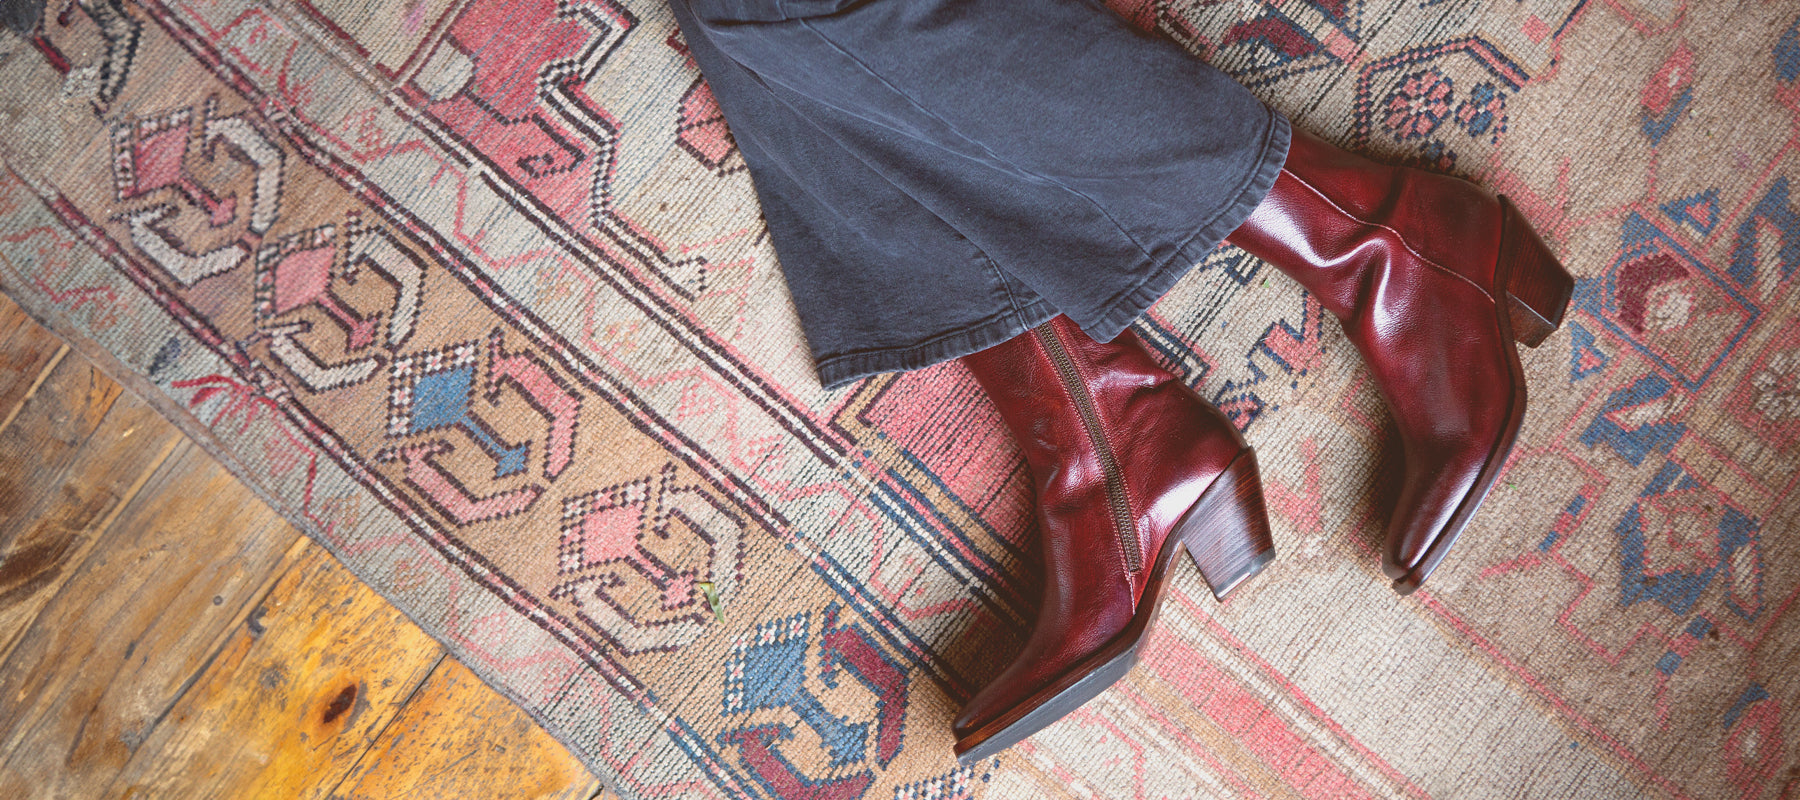 A beautiful red leather Italian made boot showcased on a rustic wool rug